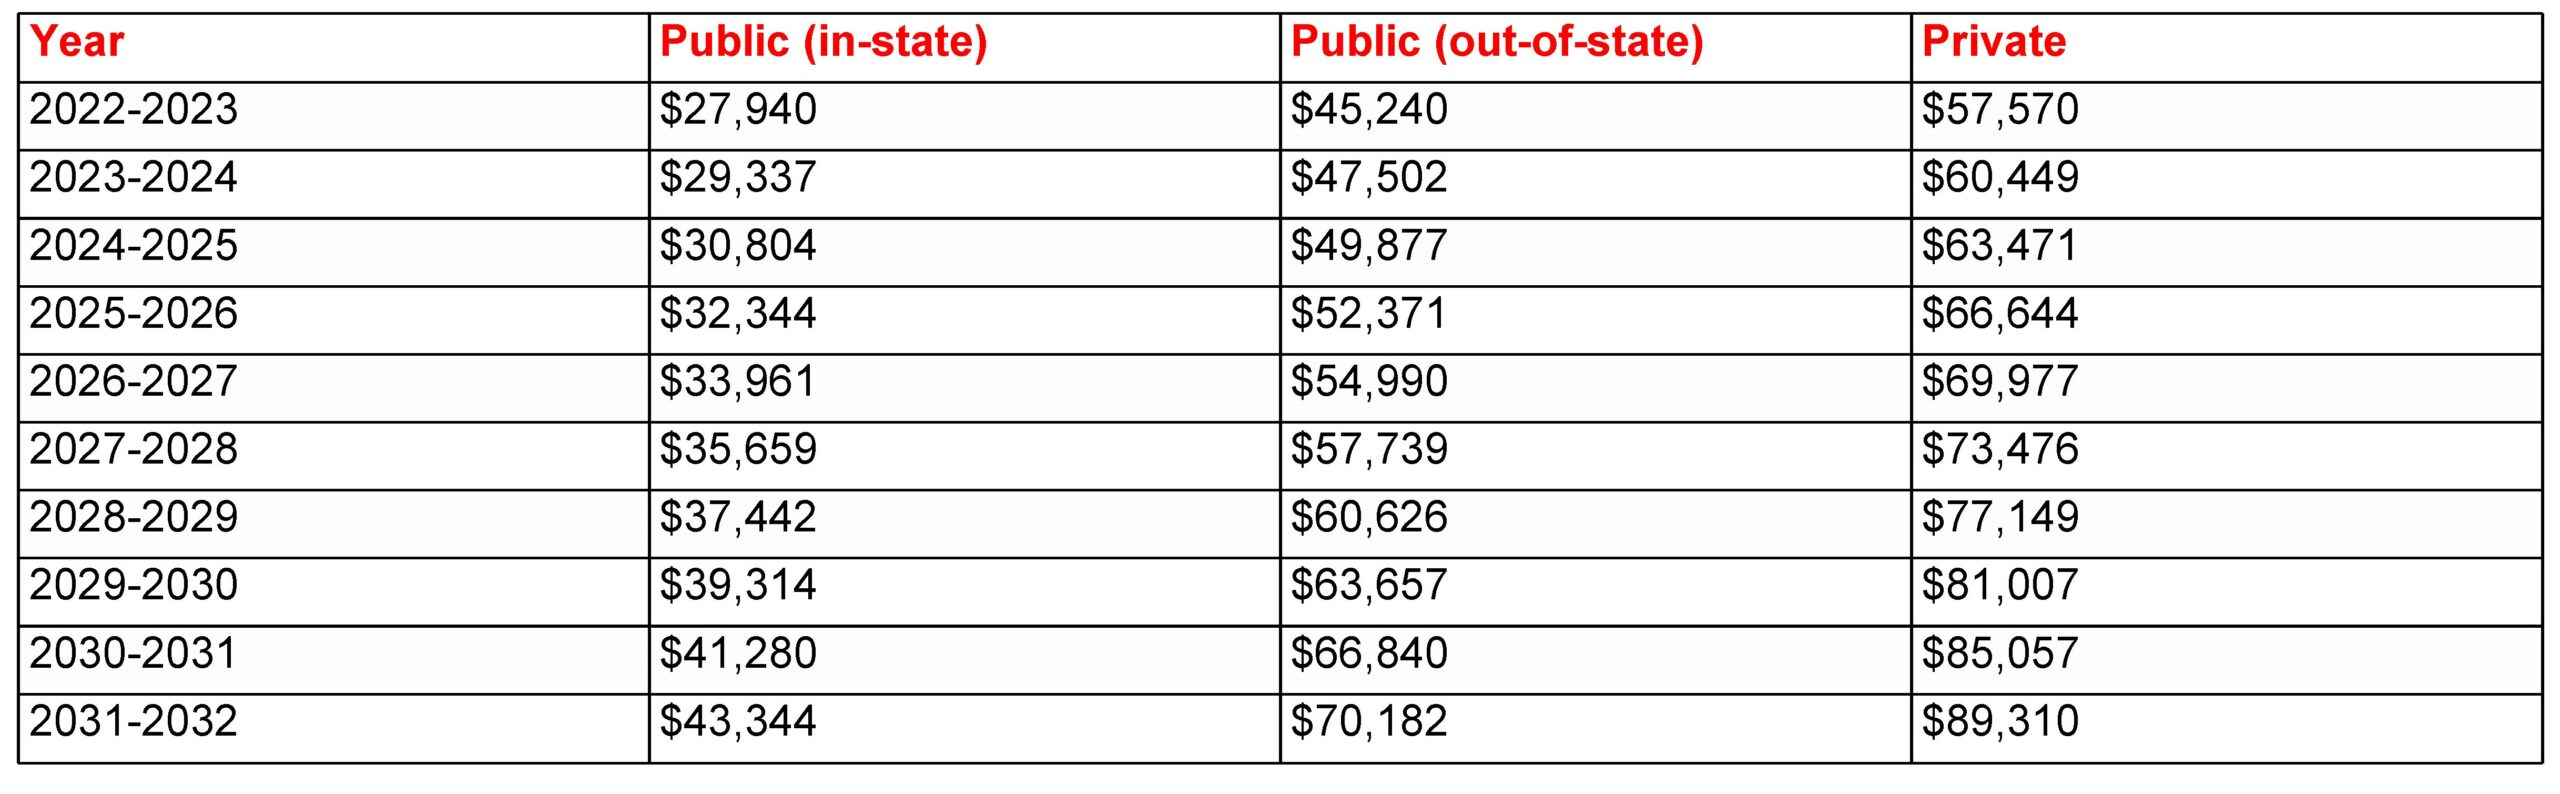 Chart for projected college expenses for the next ten years: Year 2022-2023 Public (in-state) $27,940 Public (out-of-state) $45,240 Private $57,570 Year 2023-2024 Public (in-state) $29,337 Public (out-of-state) $47,502 Private $60,449 Year 2024-2025 Public (in-state) $30,804 Public (out-of-state) $49,877 Private $63,471 Year 2025-2026 Public (in-state) $32,344 Public (out-of-state) $52,371 Private $66,644 Year 2026-2027 Public (in-state) $33,961 Public (out-of-state) $54,990 Private $69,977 Year 2027-2028 Public (in-state) $35,659 Public (out-of-state) $57,739 Private $73,476 Year 2028-2029 Public (in-state) $37,442 Public (out-of-state) $60,626 Private $77,149 Year 2029-2030 Public (in-state) $39,314 Public (out-of-state) $63,657 Private $81,007 Year 2030-2031 Public (in-state) $41,280 Public (out-of-state) $66,840 Private $85,057 Year 2031-2032 Public (in-state) $43,344 Public (out-of-state) $70,182 Private $89,310 Article title: How to Estimate College Costs